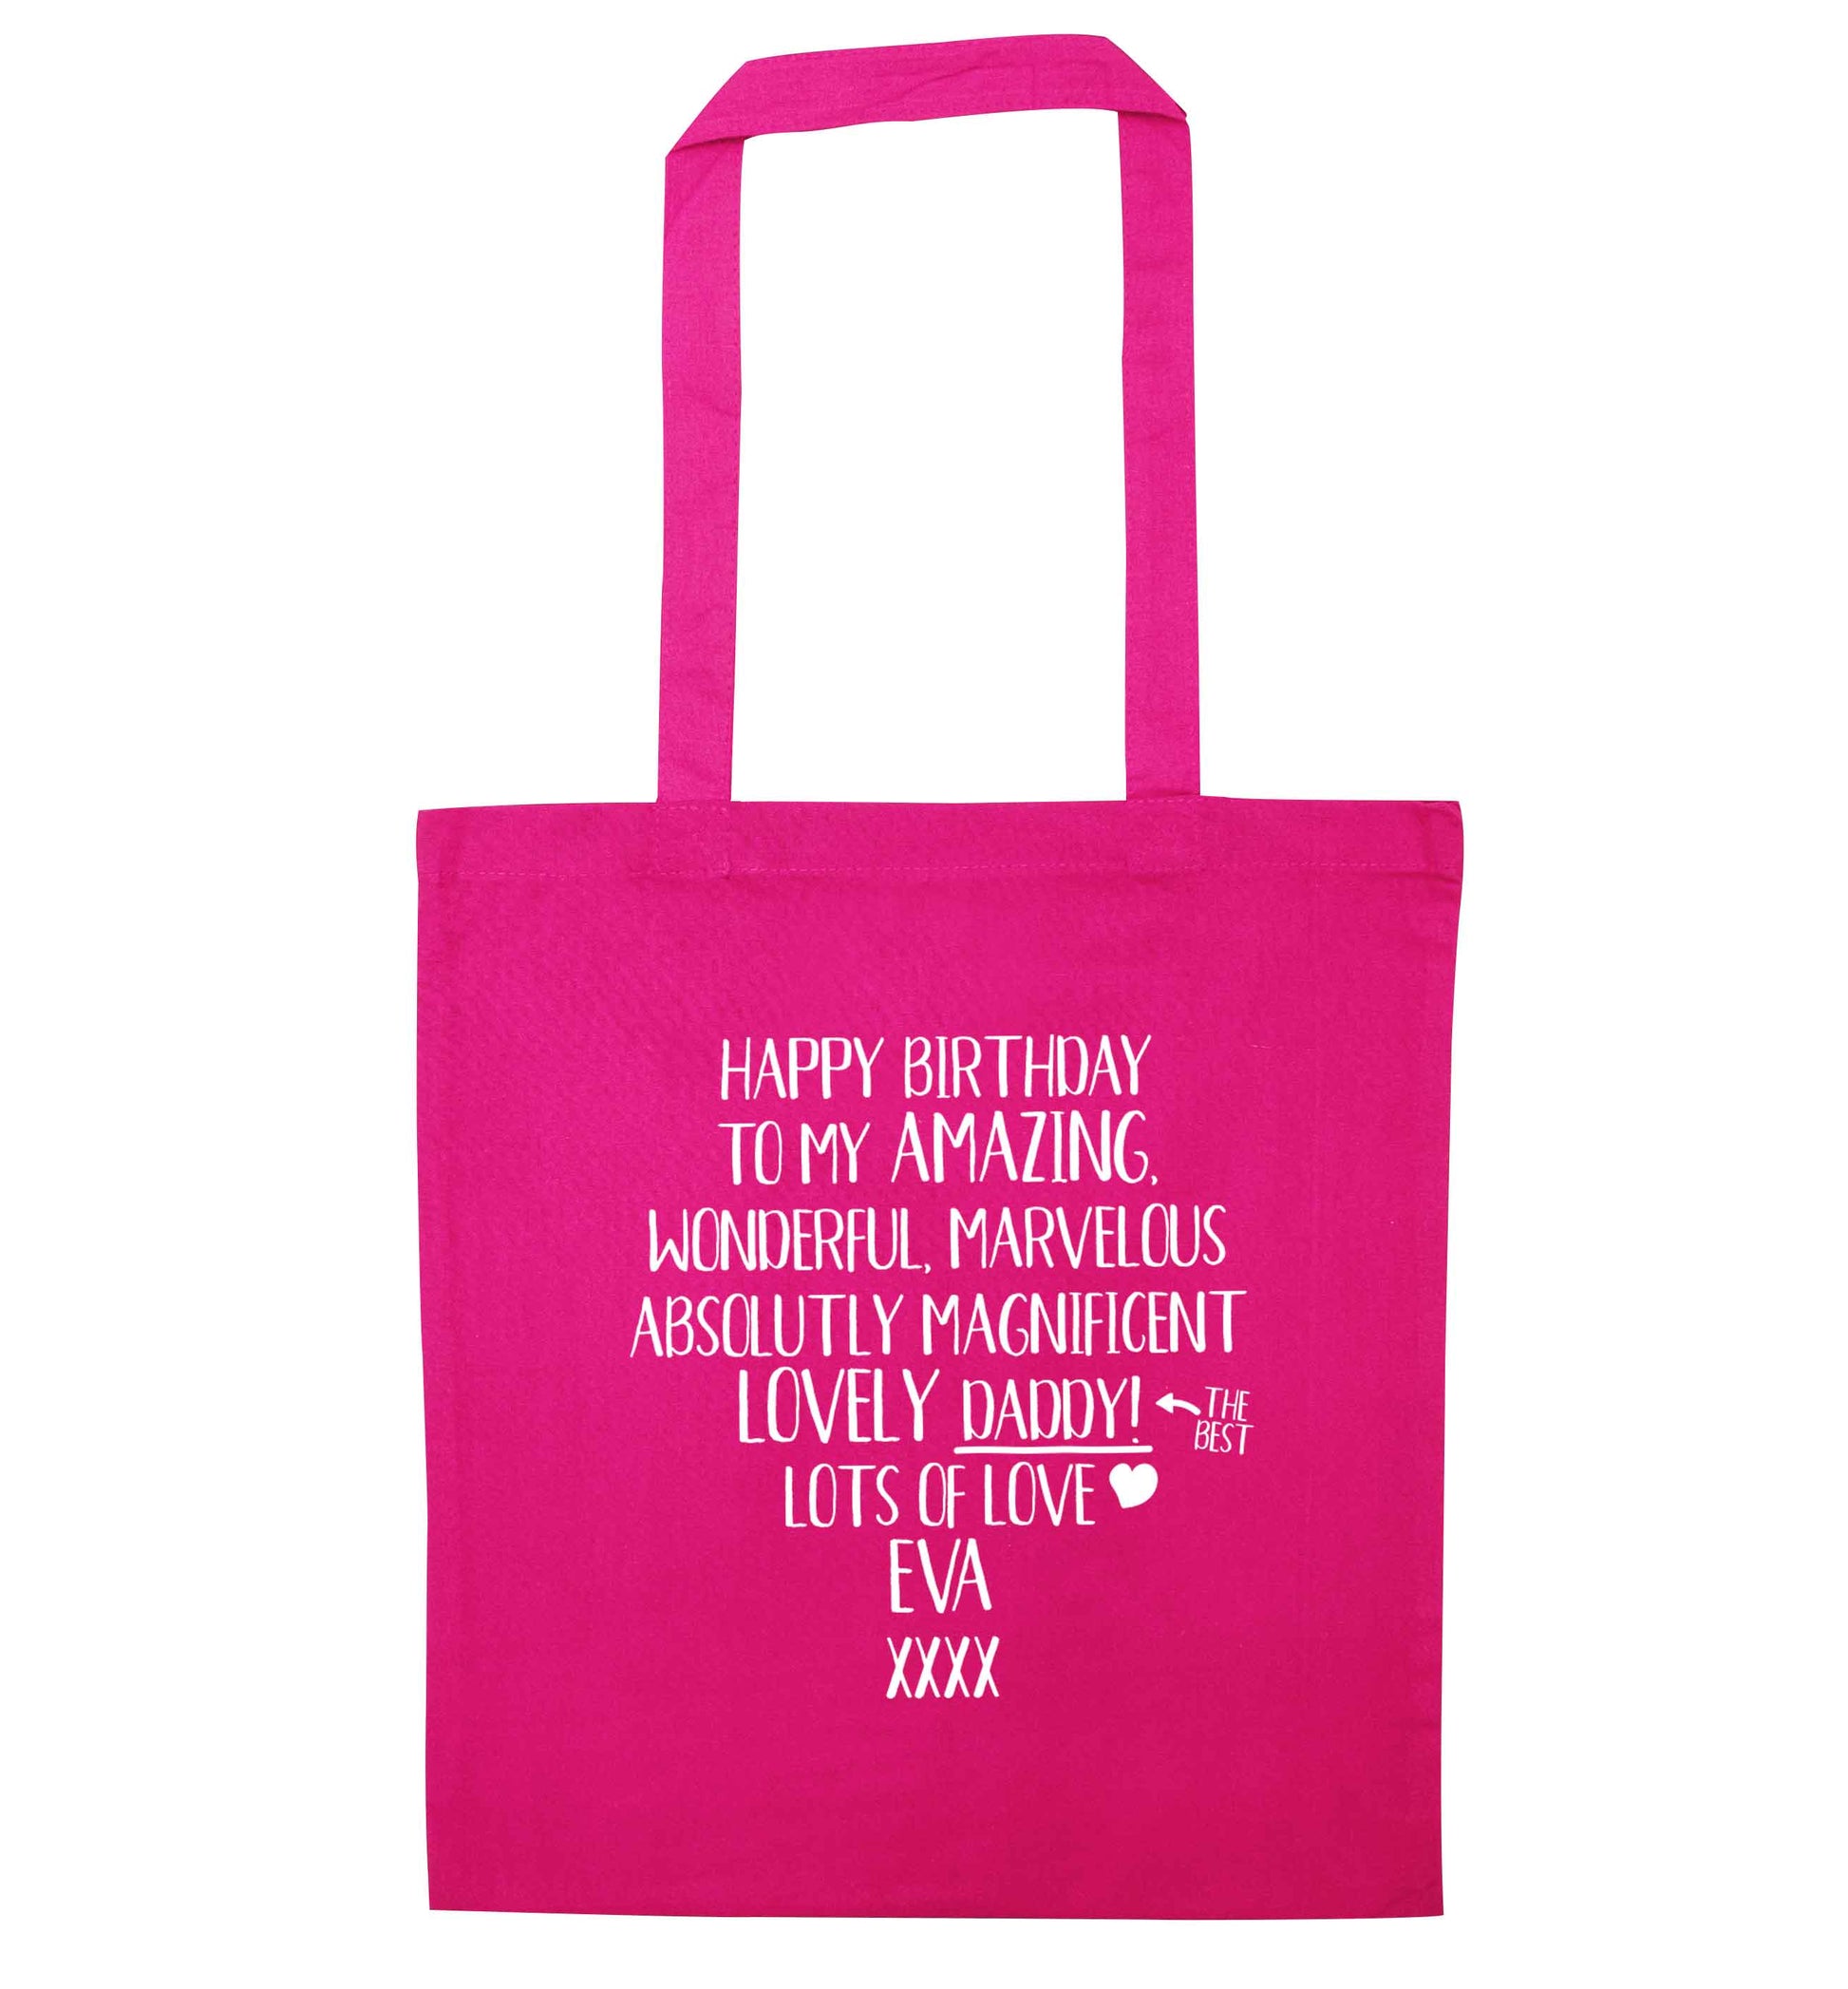 Personalised happy birthday to my amazing, wonderful, lovely daddy pink tote bag